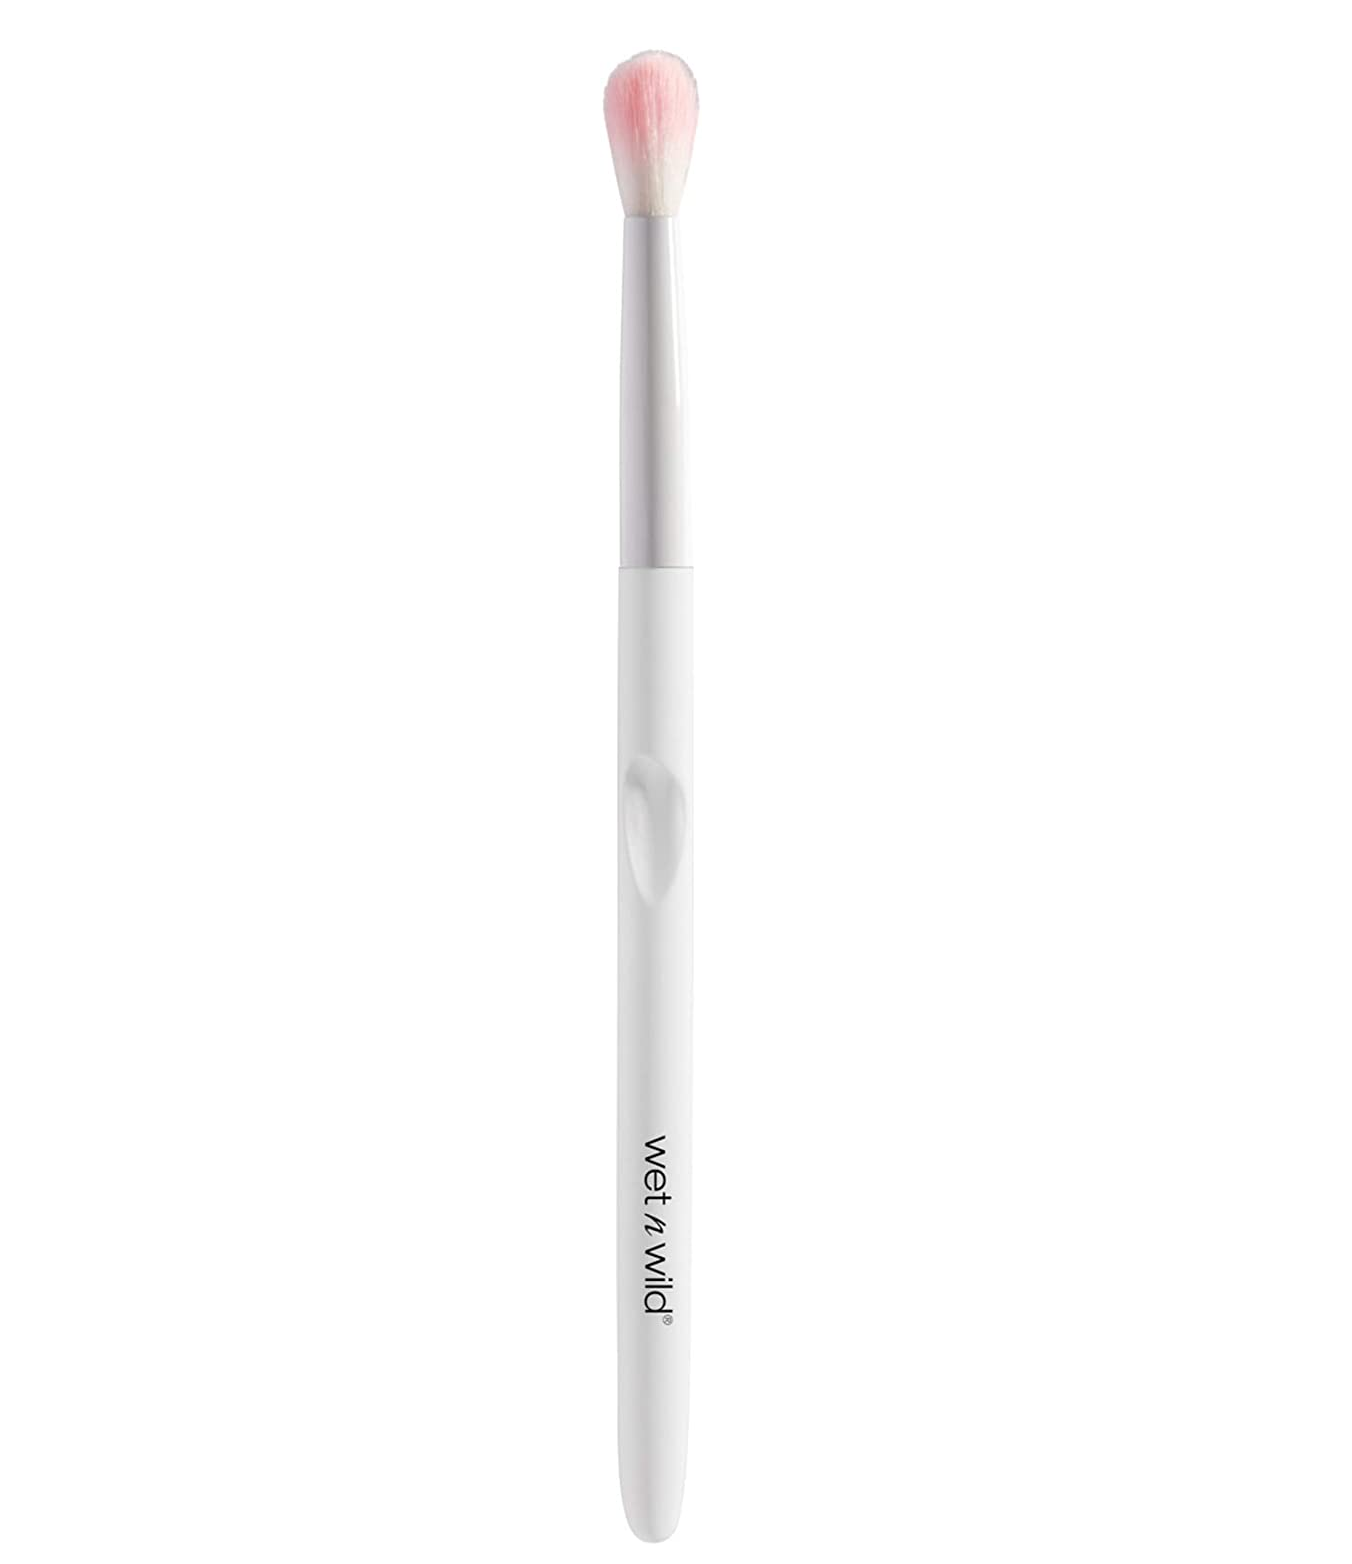 A small makeup brush on a plain background